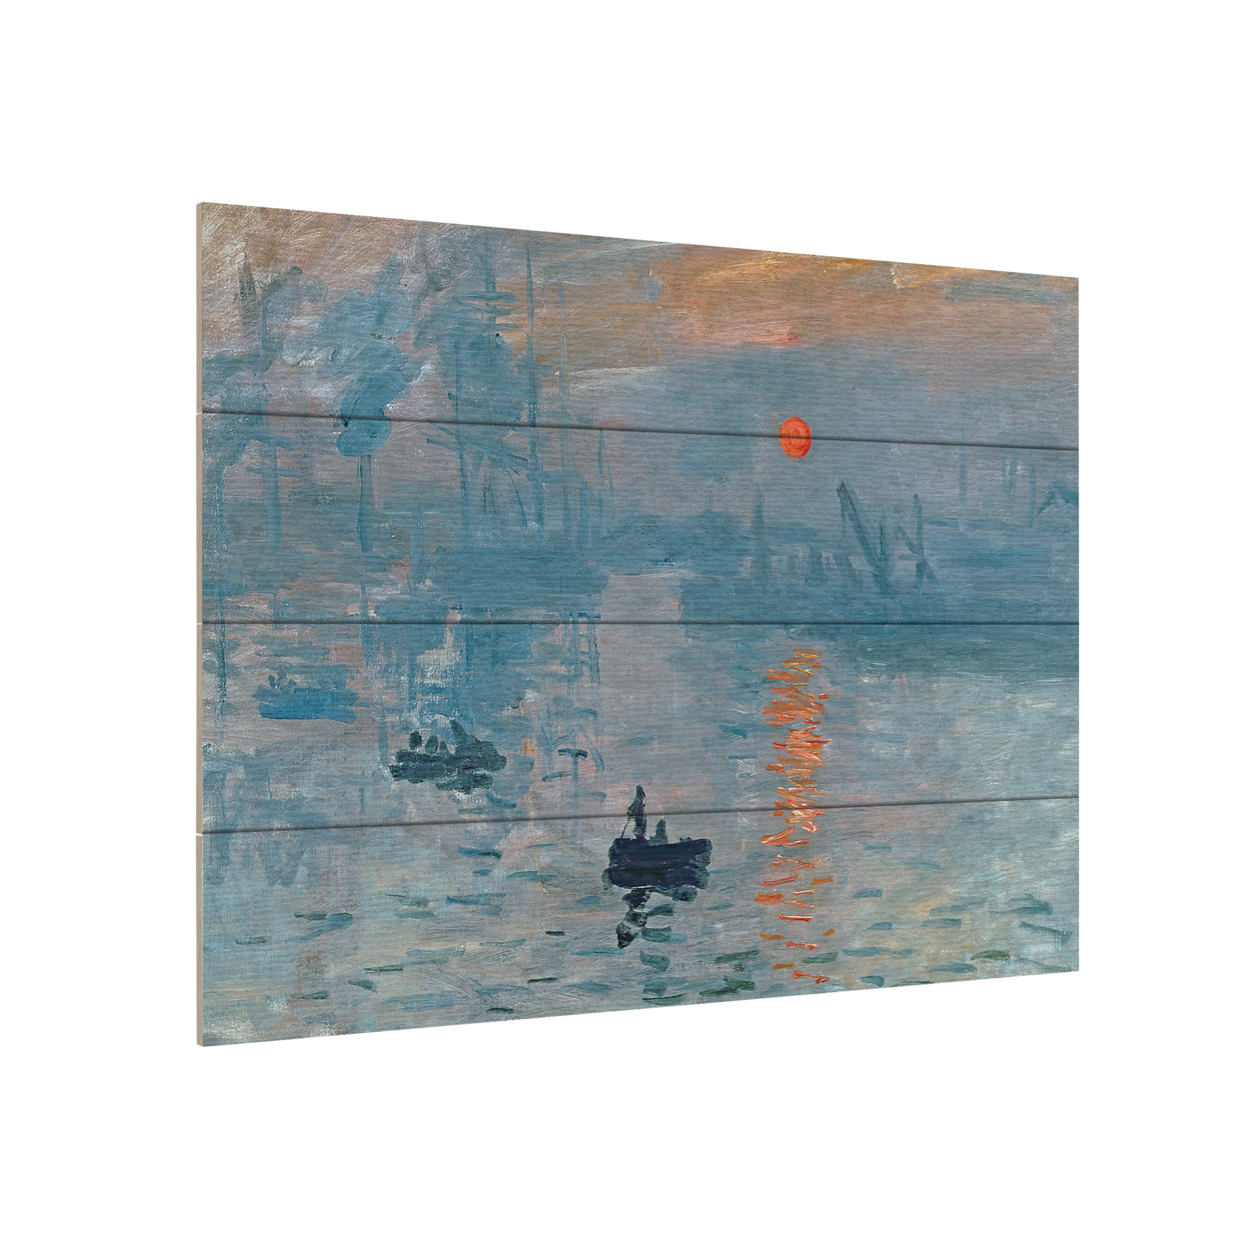 Wall Art 12 X 16 Inches Titled Impression Sunrise Ready To Hang Printed On Wooden Planks